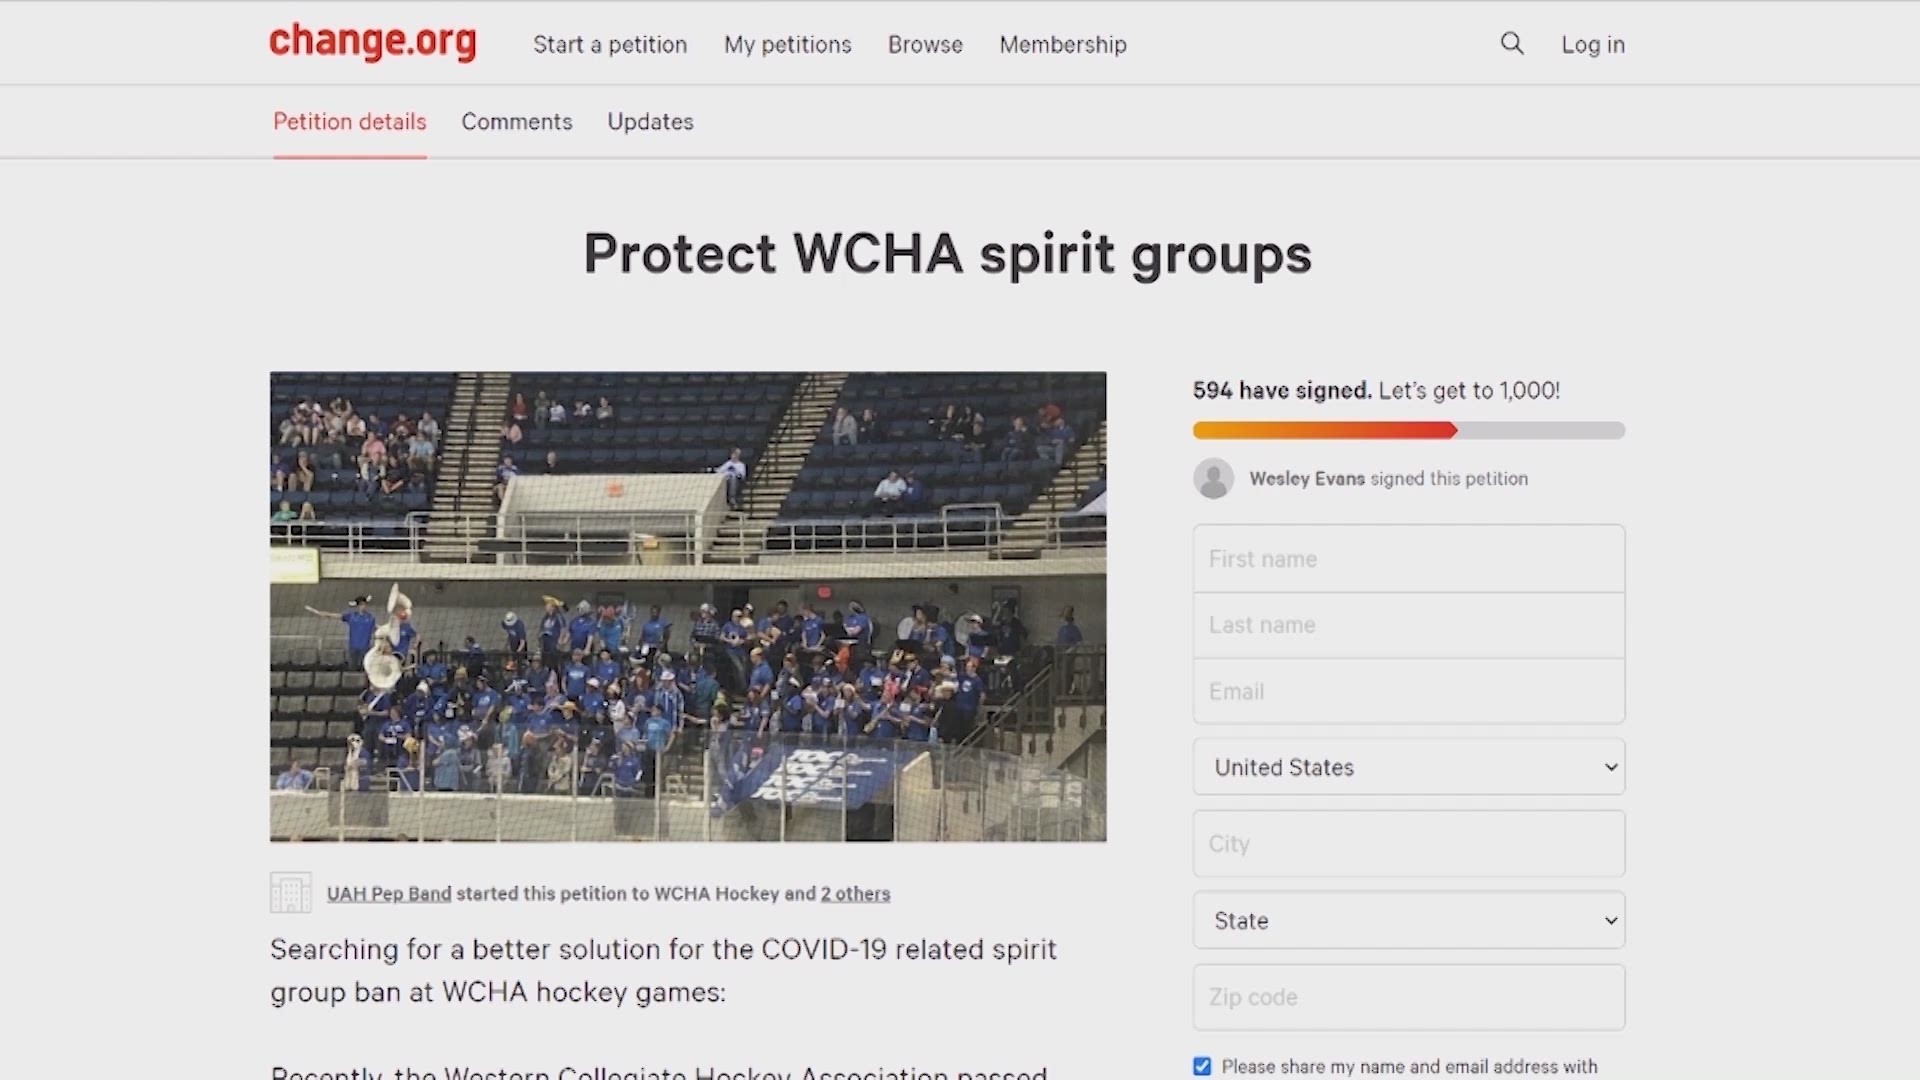 Despite hundreds signing a petition for the UAH Pep Band to play at hockey games this season, the WCHA is not budging on their stance.